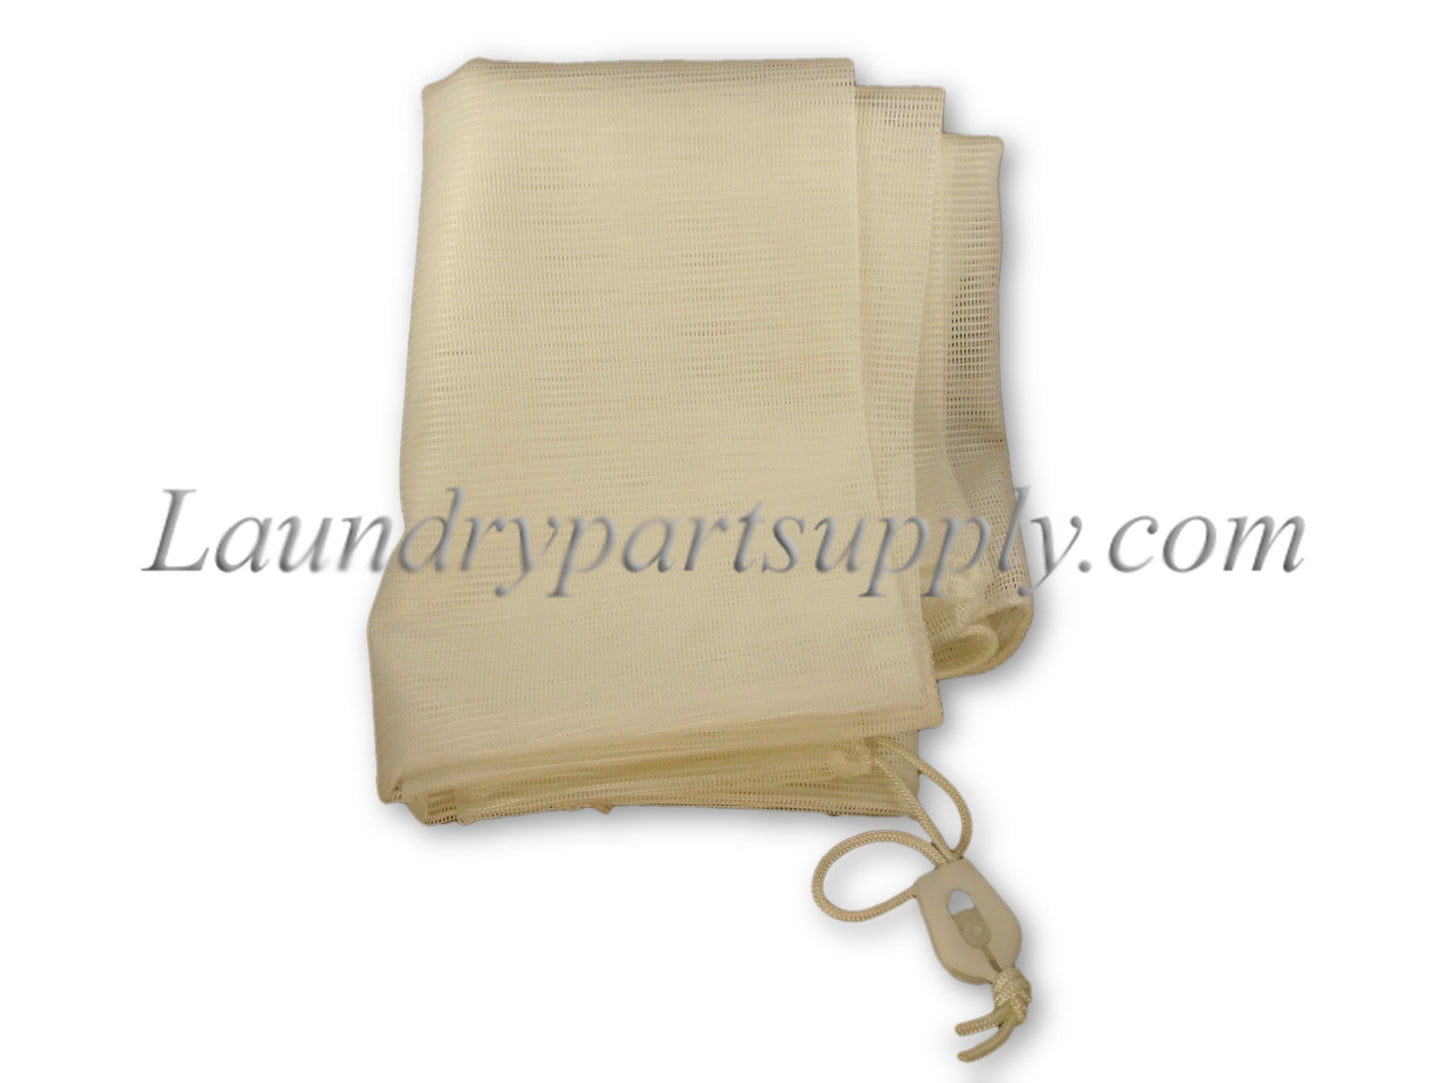 Dry CleanNet Bags,24" x 36", Dr.crd/clsr